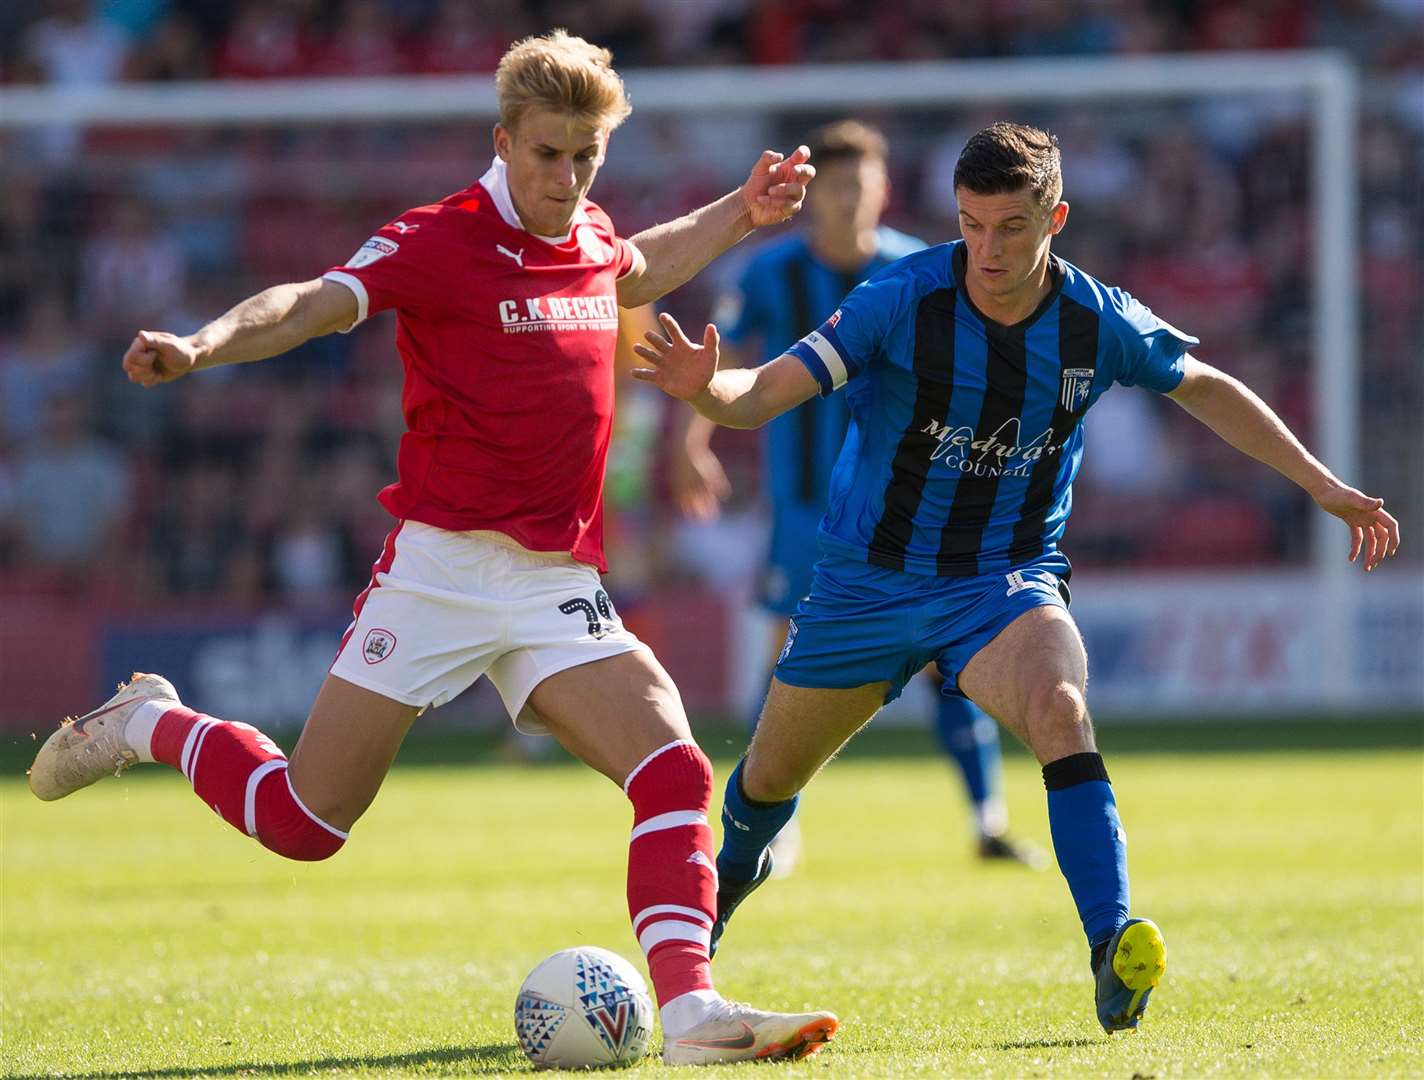 Gillingham's Callum Reilly looks to close down Brad Potts. Picture: Ady Kerry